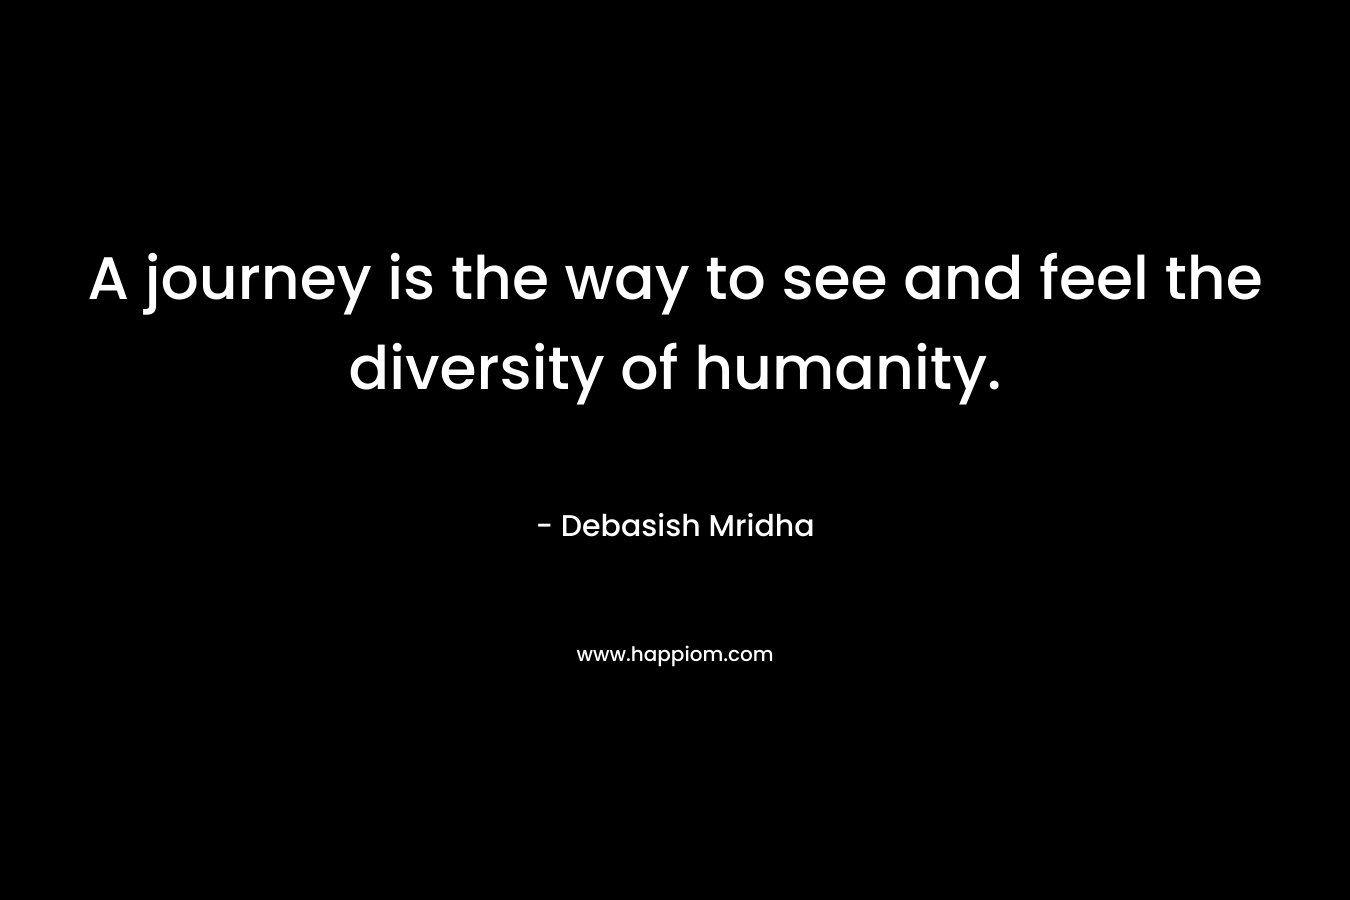 A journey is the way to see and feel the diversity of humanity. – Debasish Mridha